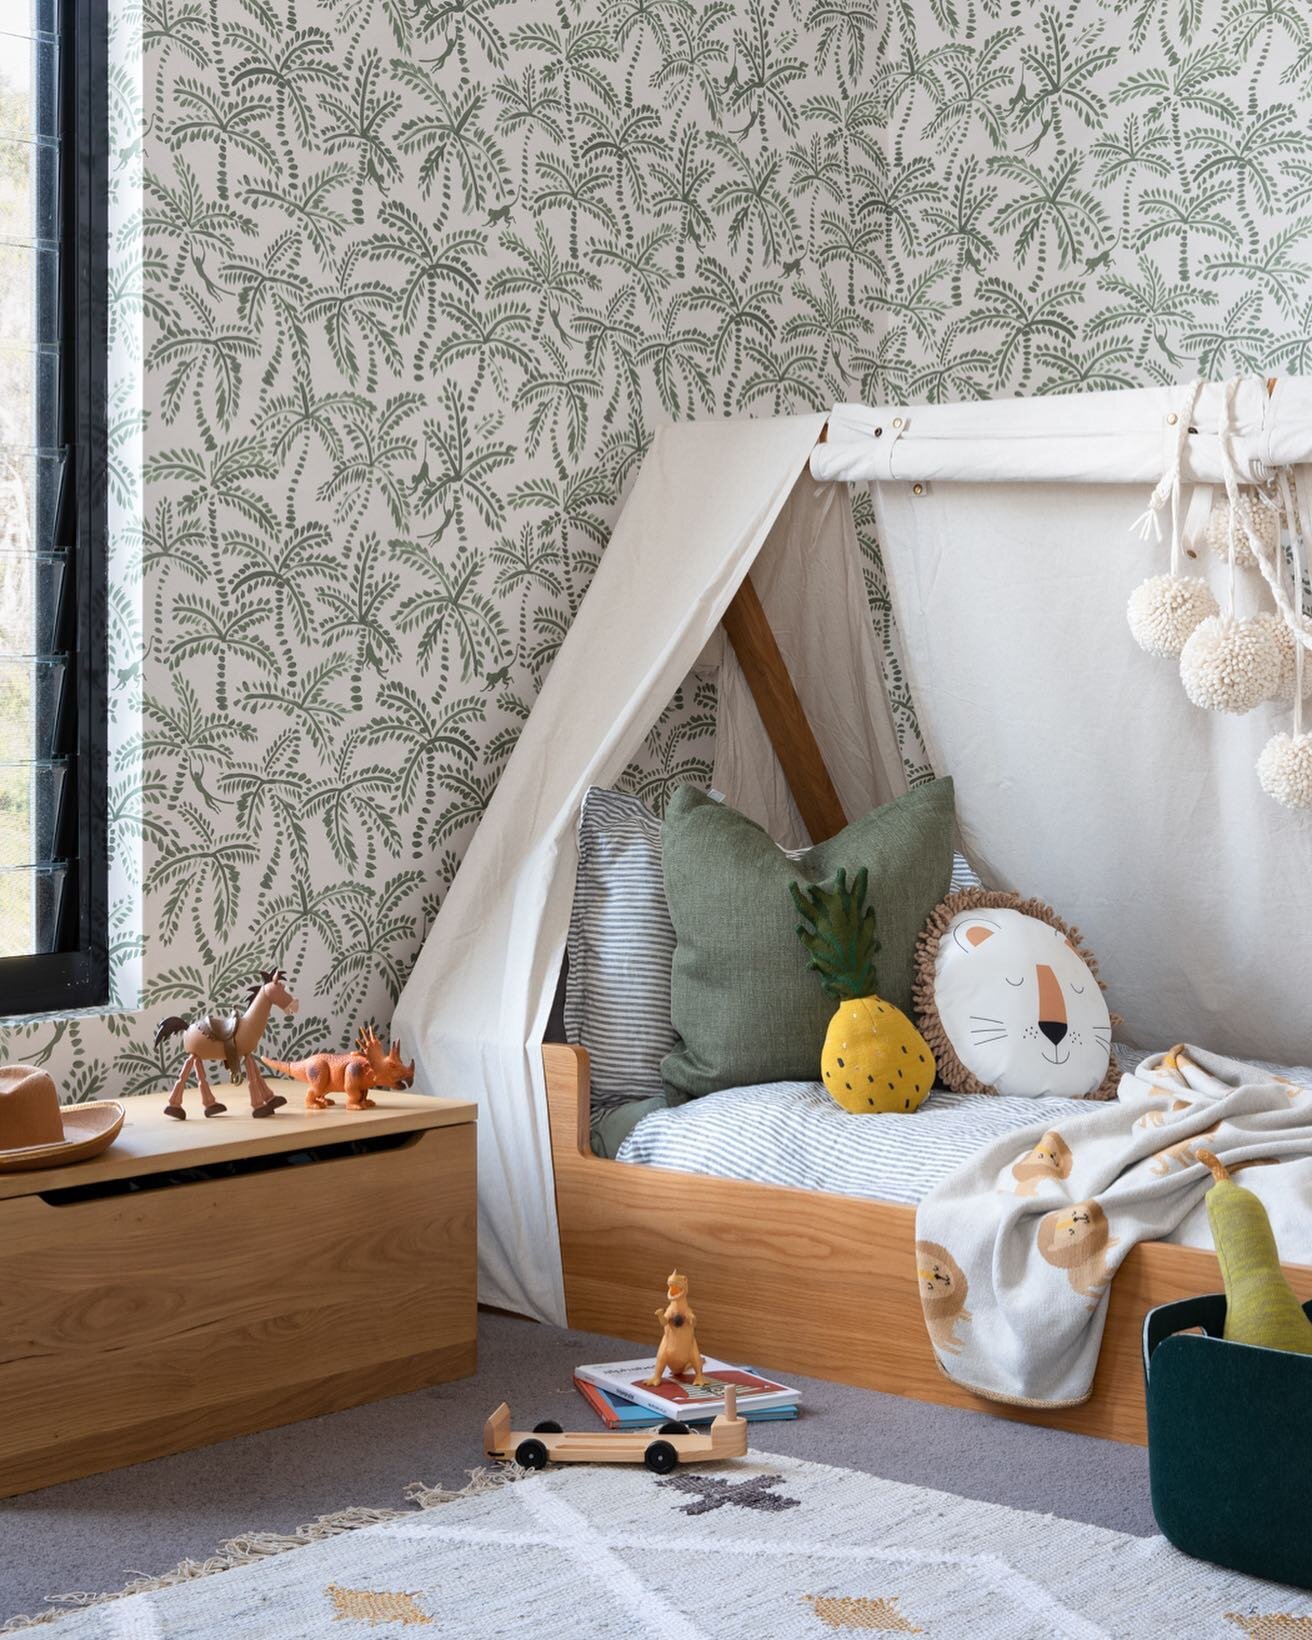 ➕Wallpaper➕It&rsquo;s no secret I love using wallpaper. Especially in a child&rsquo;s bedroom to add personality and warmth. 

Like this gorgeous little guys bedroom for my 2020 project in Banjup. I made sure I selected a wallpaper and furniture that